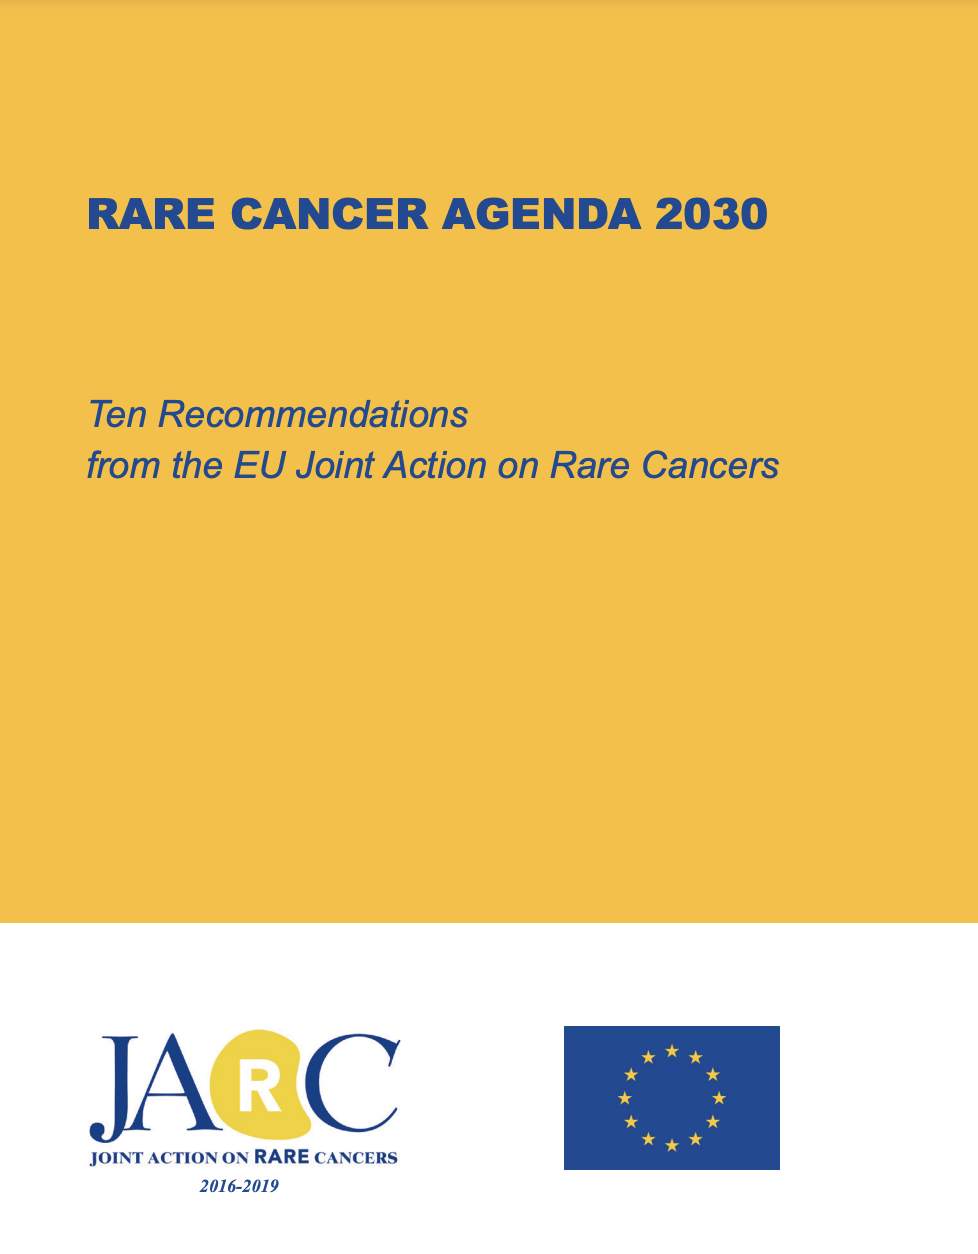 RARE CANCER AGENDA 2030 — Ten Recommendations from the EU Joint Action on Rare Cancers